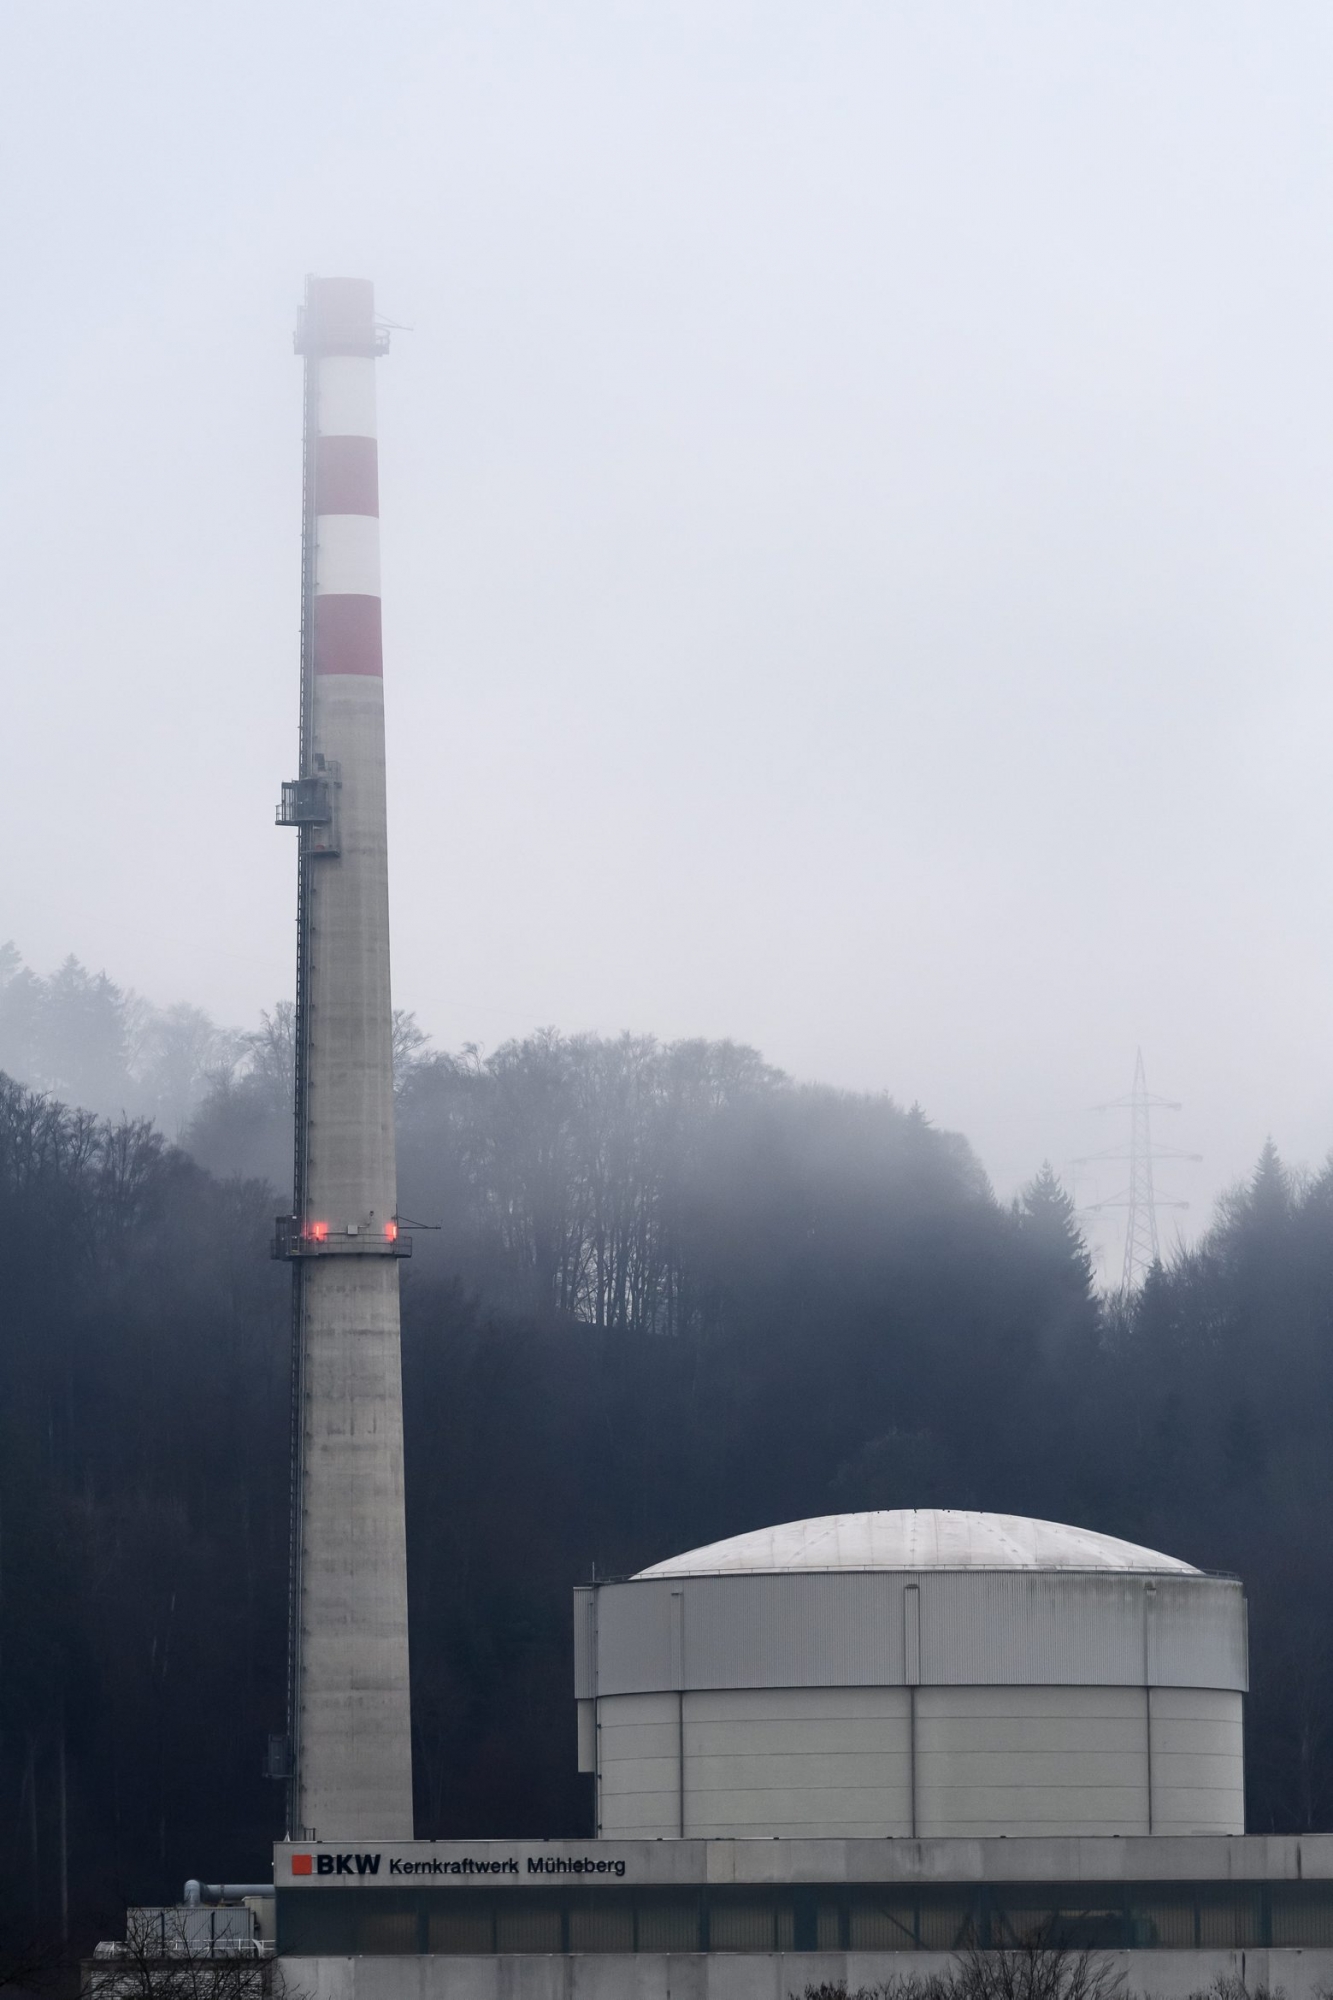 The Muehleberg nuclear power plant pictured during the official shutdown of the Muehleberg nuclear power plant after 47 years of operation, on Friday, 19 December 2019, in Muehleberg, Switzerland. The removal of the nuclear power plant will last till 2034. (KEYSTONE/Anthony Anex) SWITZERLAND SHUTDOWN MUEHLEBERG NUCLEAR POWER PLANT